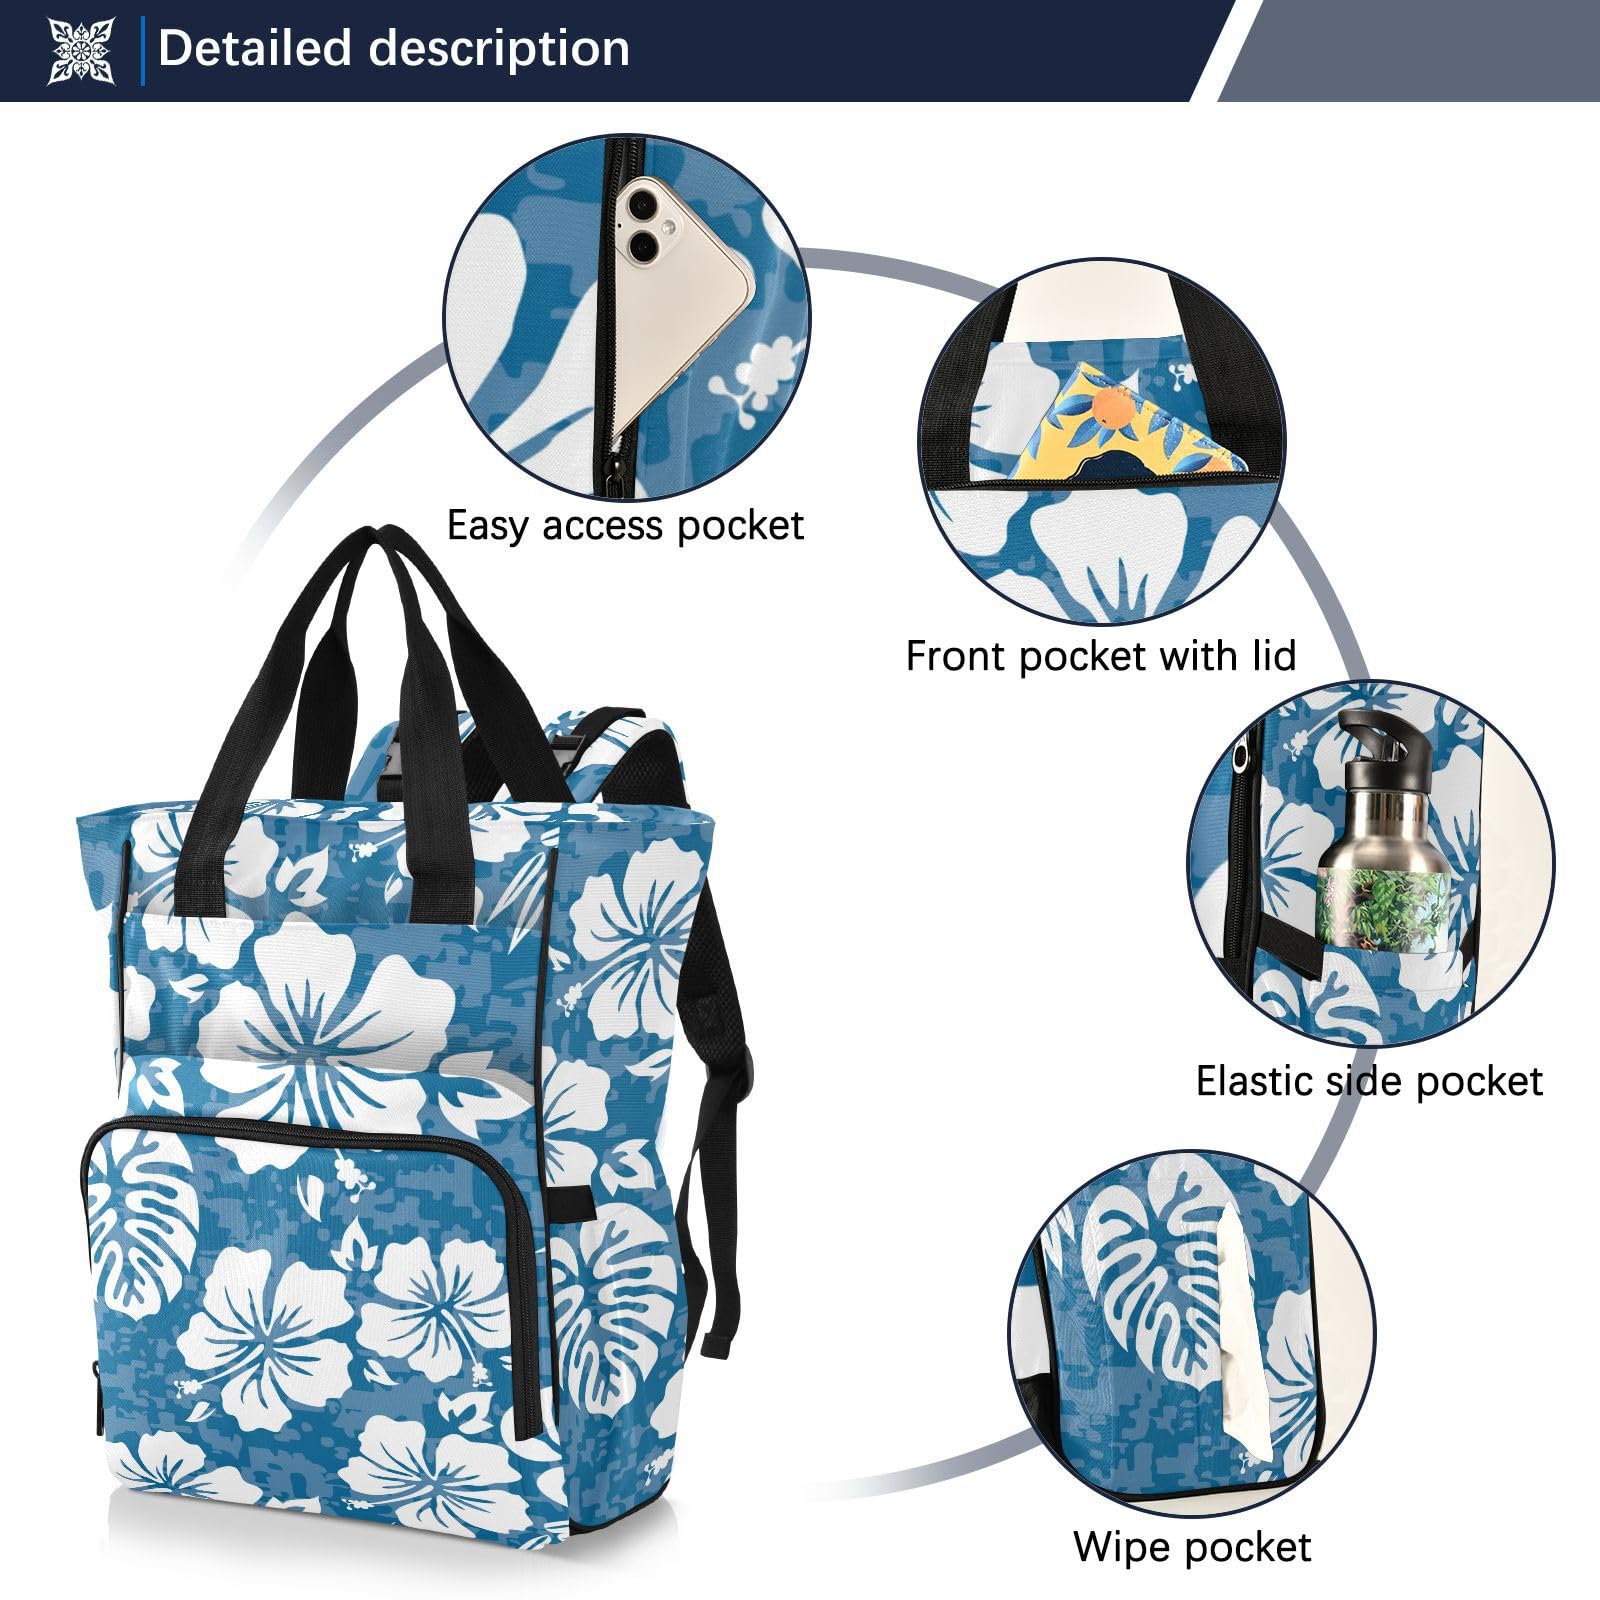 innewgogo Aloha Hawaiian Floral Diaper Bag Backpack for Women Men Large Capacity Baby Changing Totes with Three Pockets Multifunction Baby Nappy Bag for Travelling Shopping Picnicking